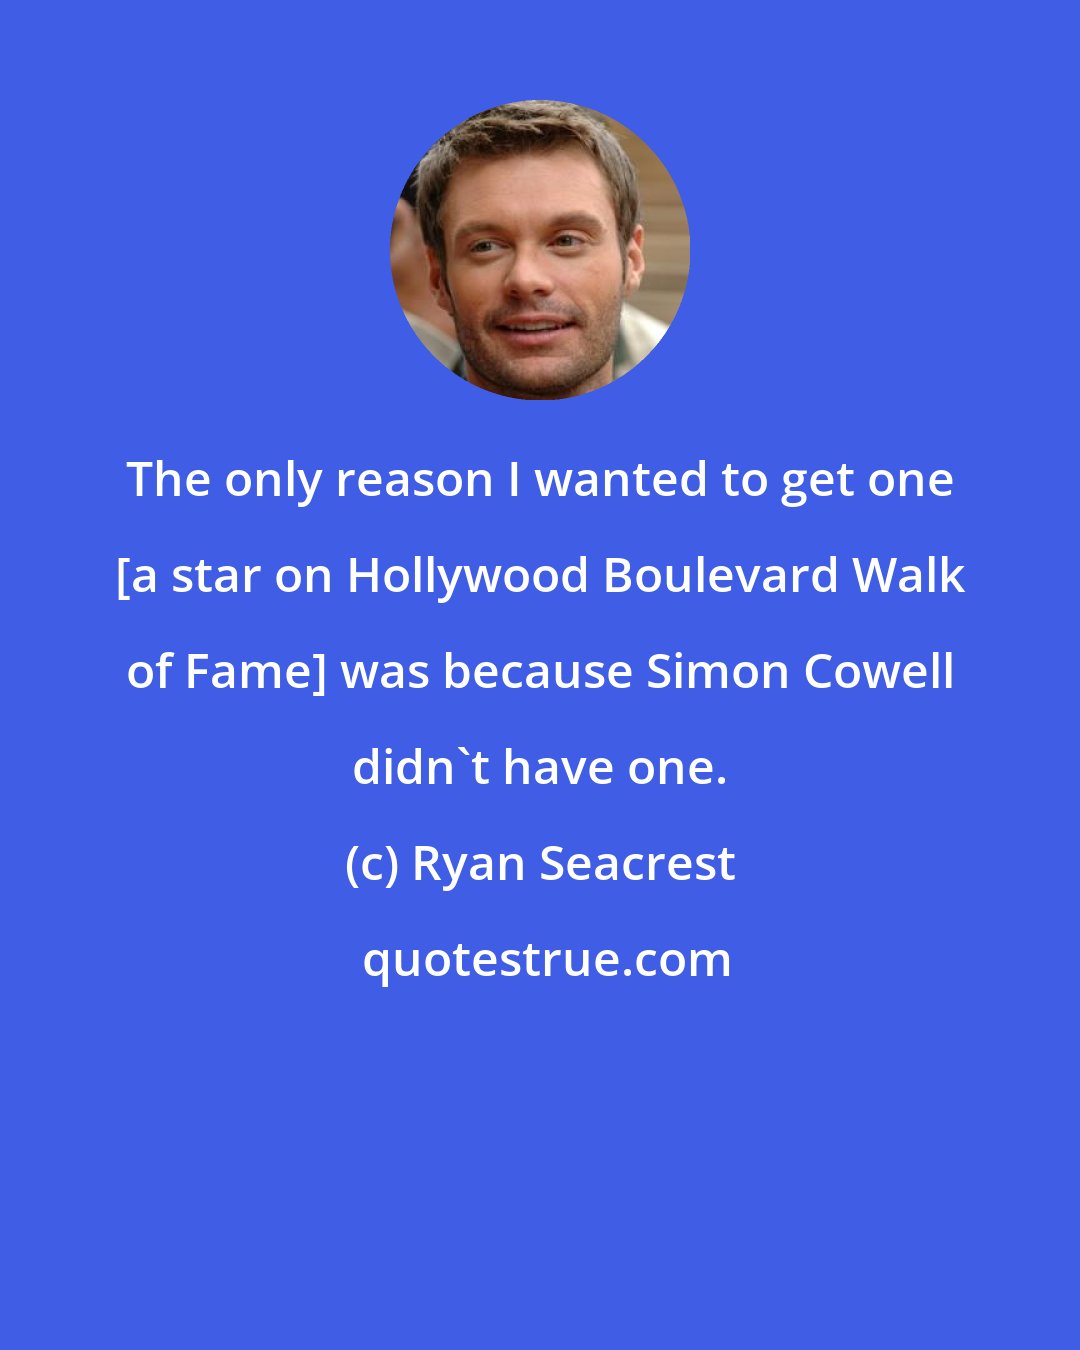 Ryan Seacrest: The only reason I wanted to get one [a star on Hollywood Boulevard Walk of Fame] was because Simon Cowell didn't have one.